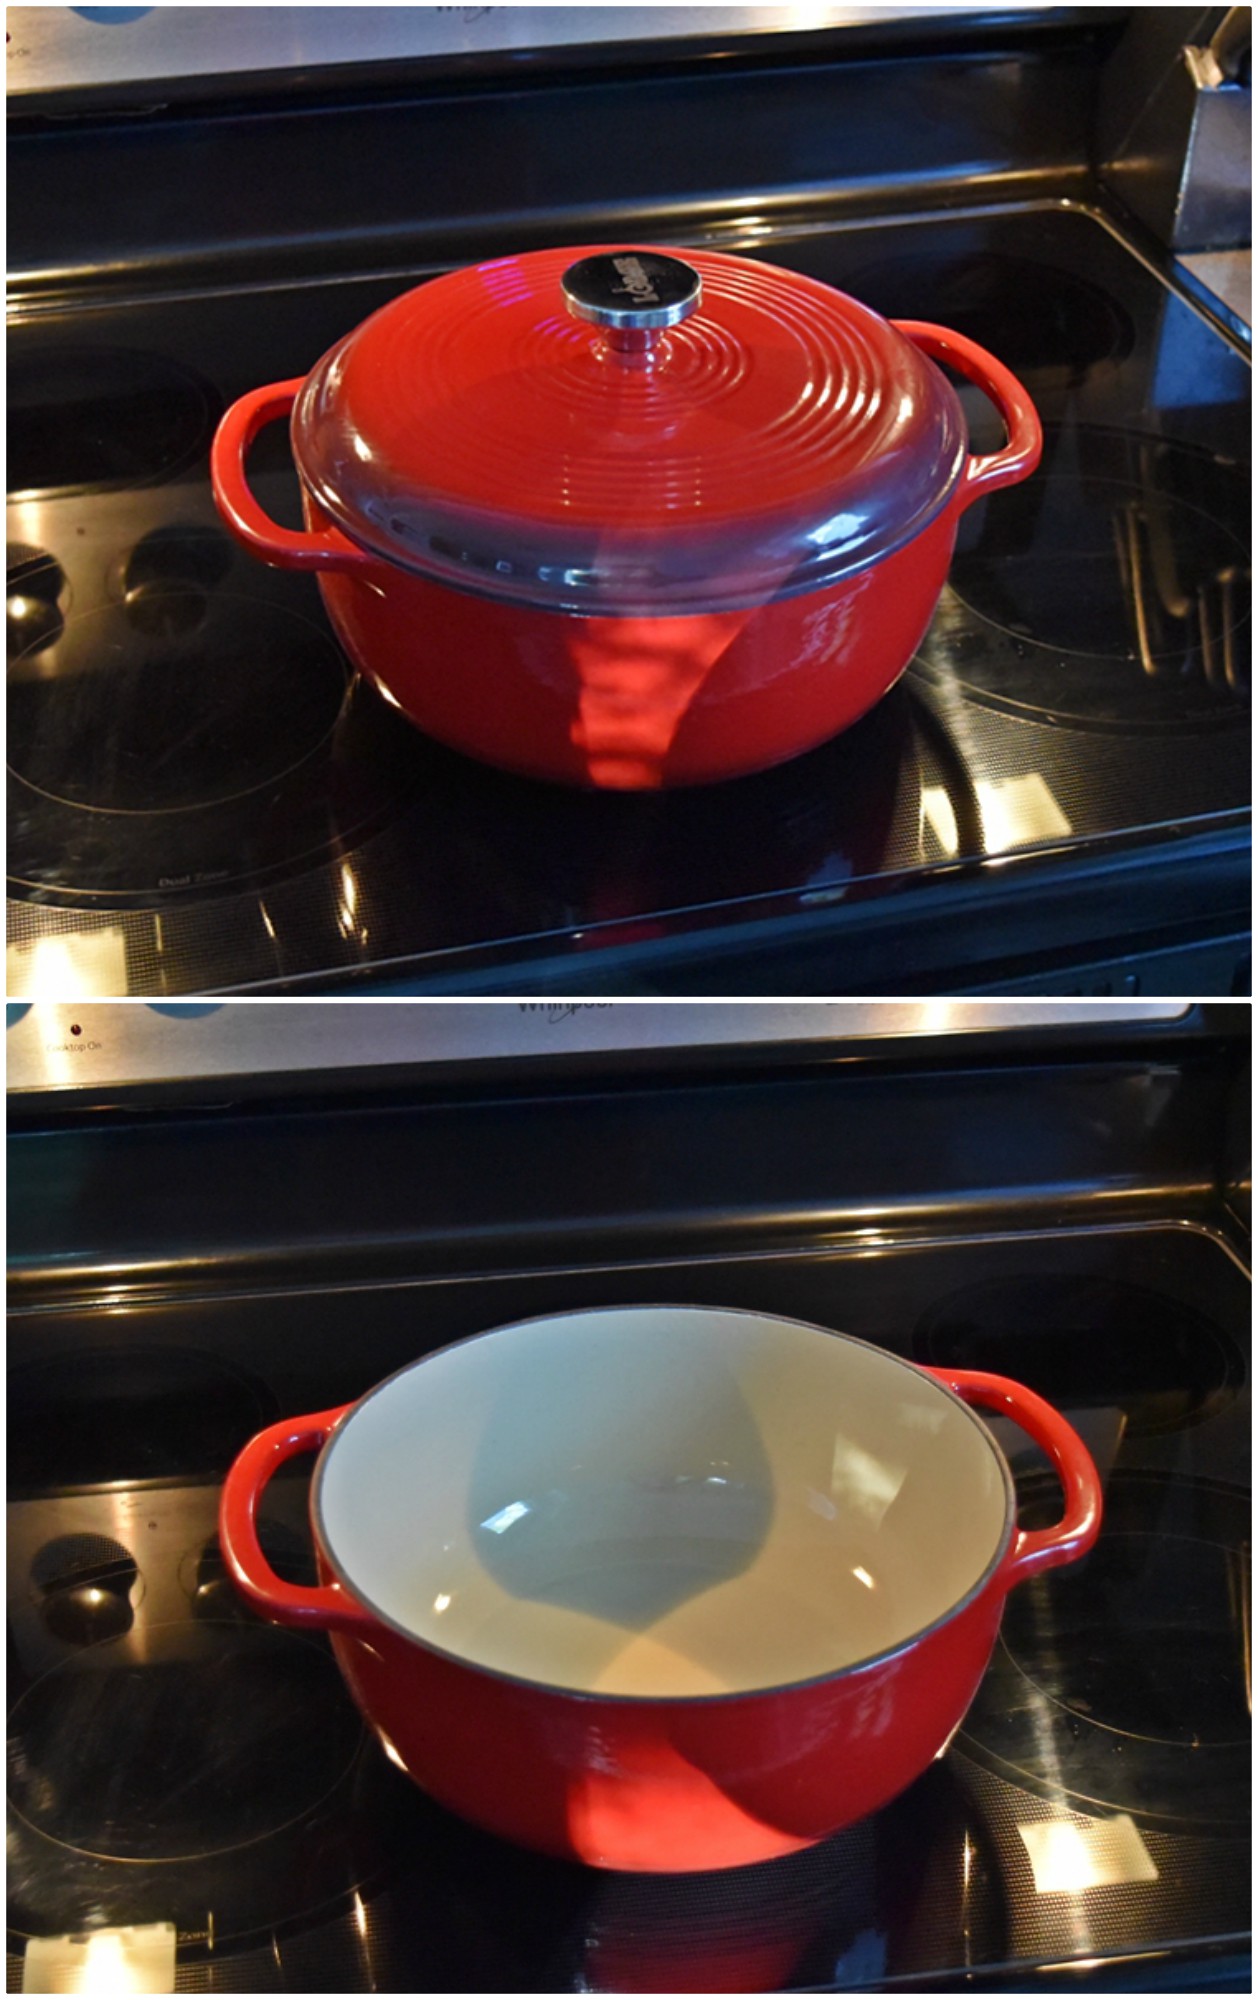 Two pictures of a casserole on a stove, demonstrating the concept of entropy in a closed system.